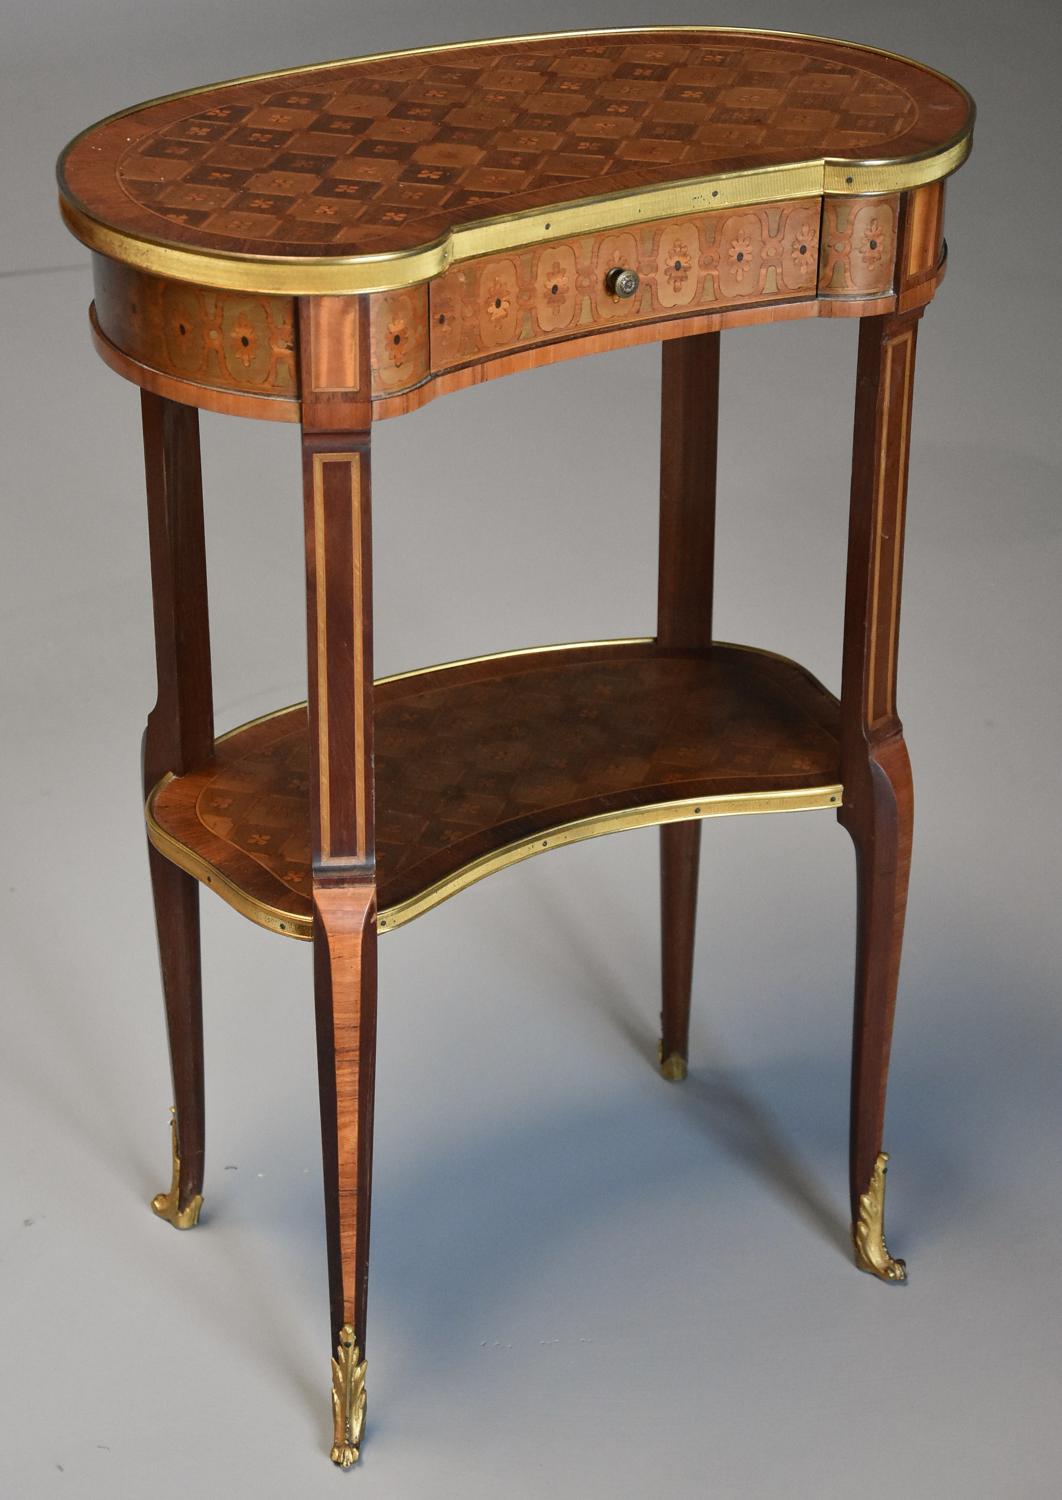 Late 19thc French parquetry Kingwood kidney shaped occasional table